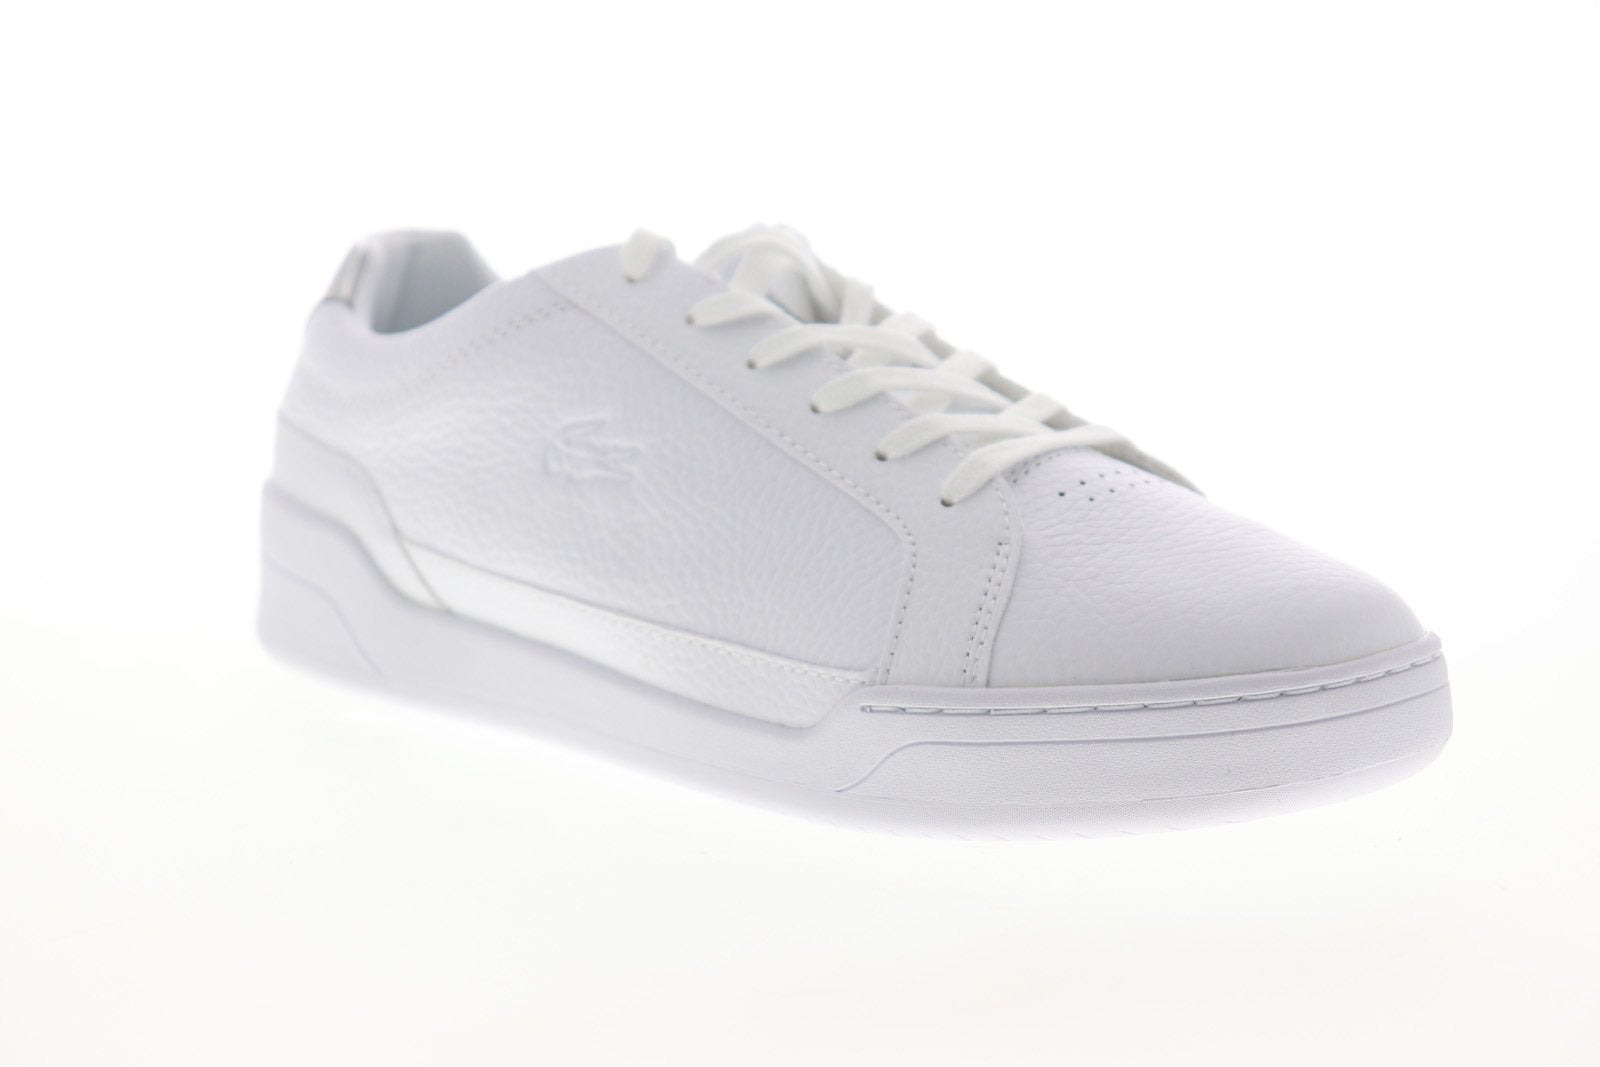 Lacoste Challenge 120 3 SMA Mens Leather Lifestyle Sneakers Shoe - Ruze Shoes